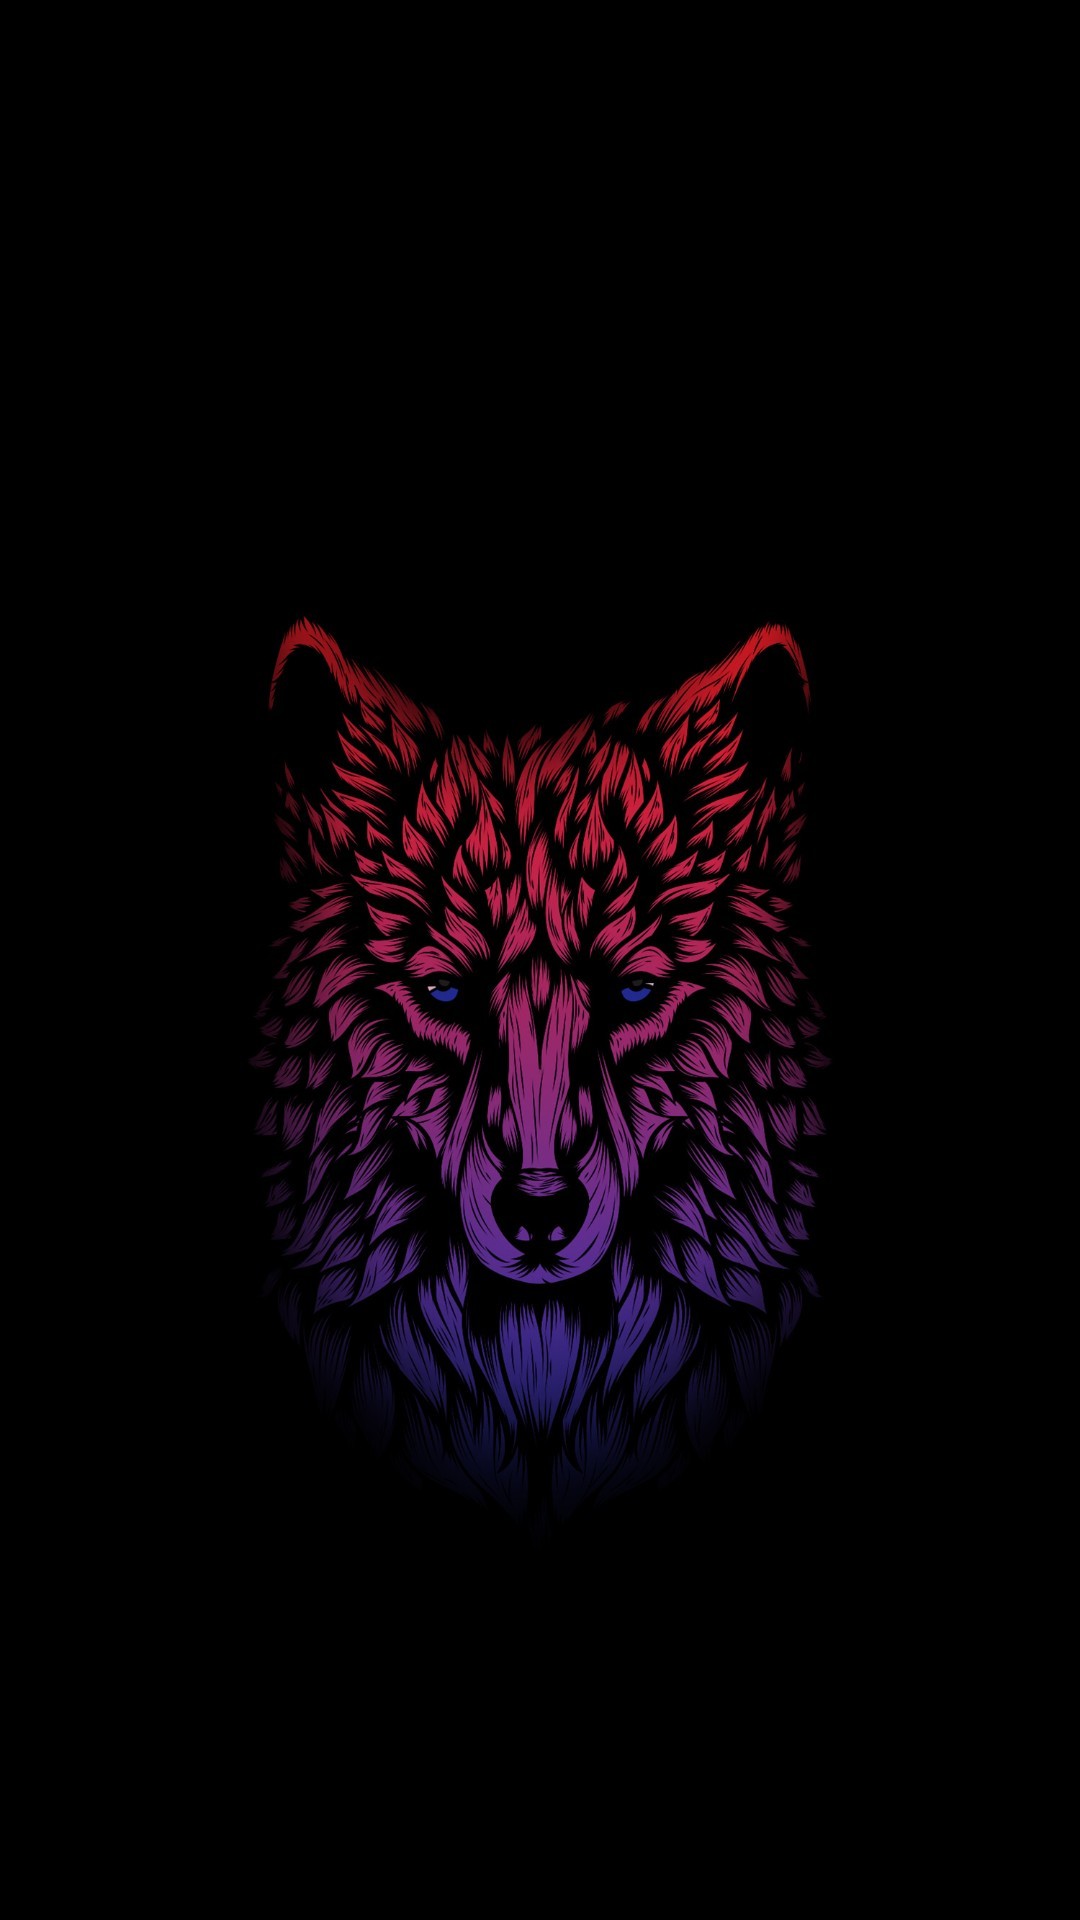 1080x1920 Wallpapers Android, Wolves, Shirt Print, Manish, Mobile Wallpaper, Phone  Backgrounds, Sony, Samsung Galaxy, Ipad